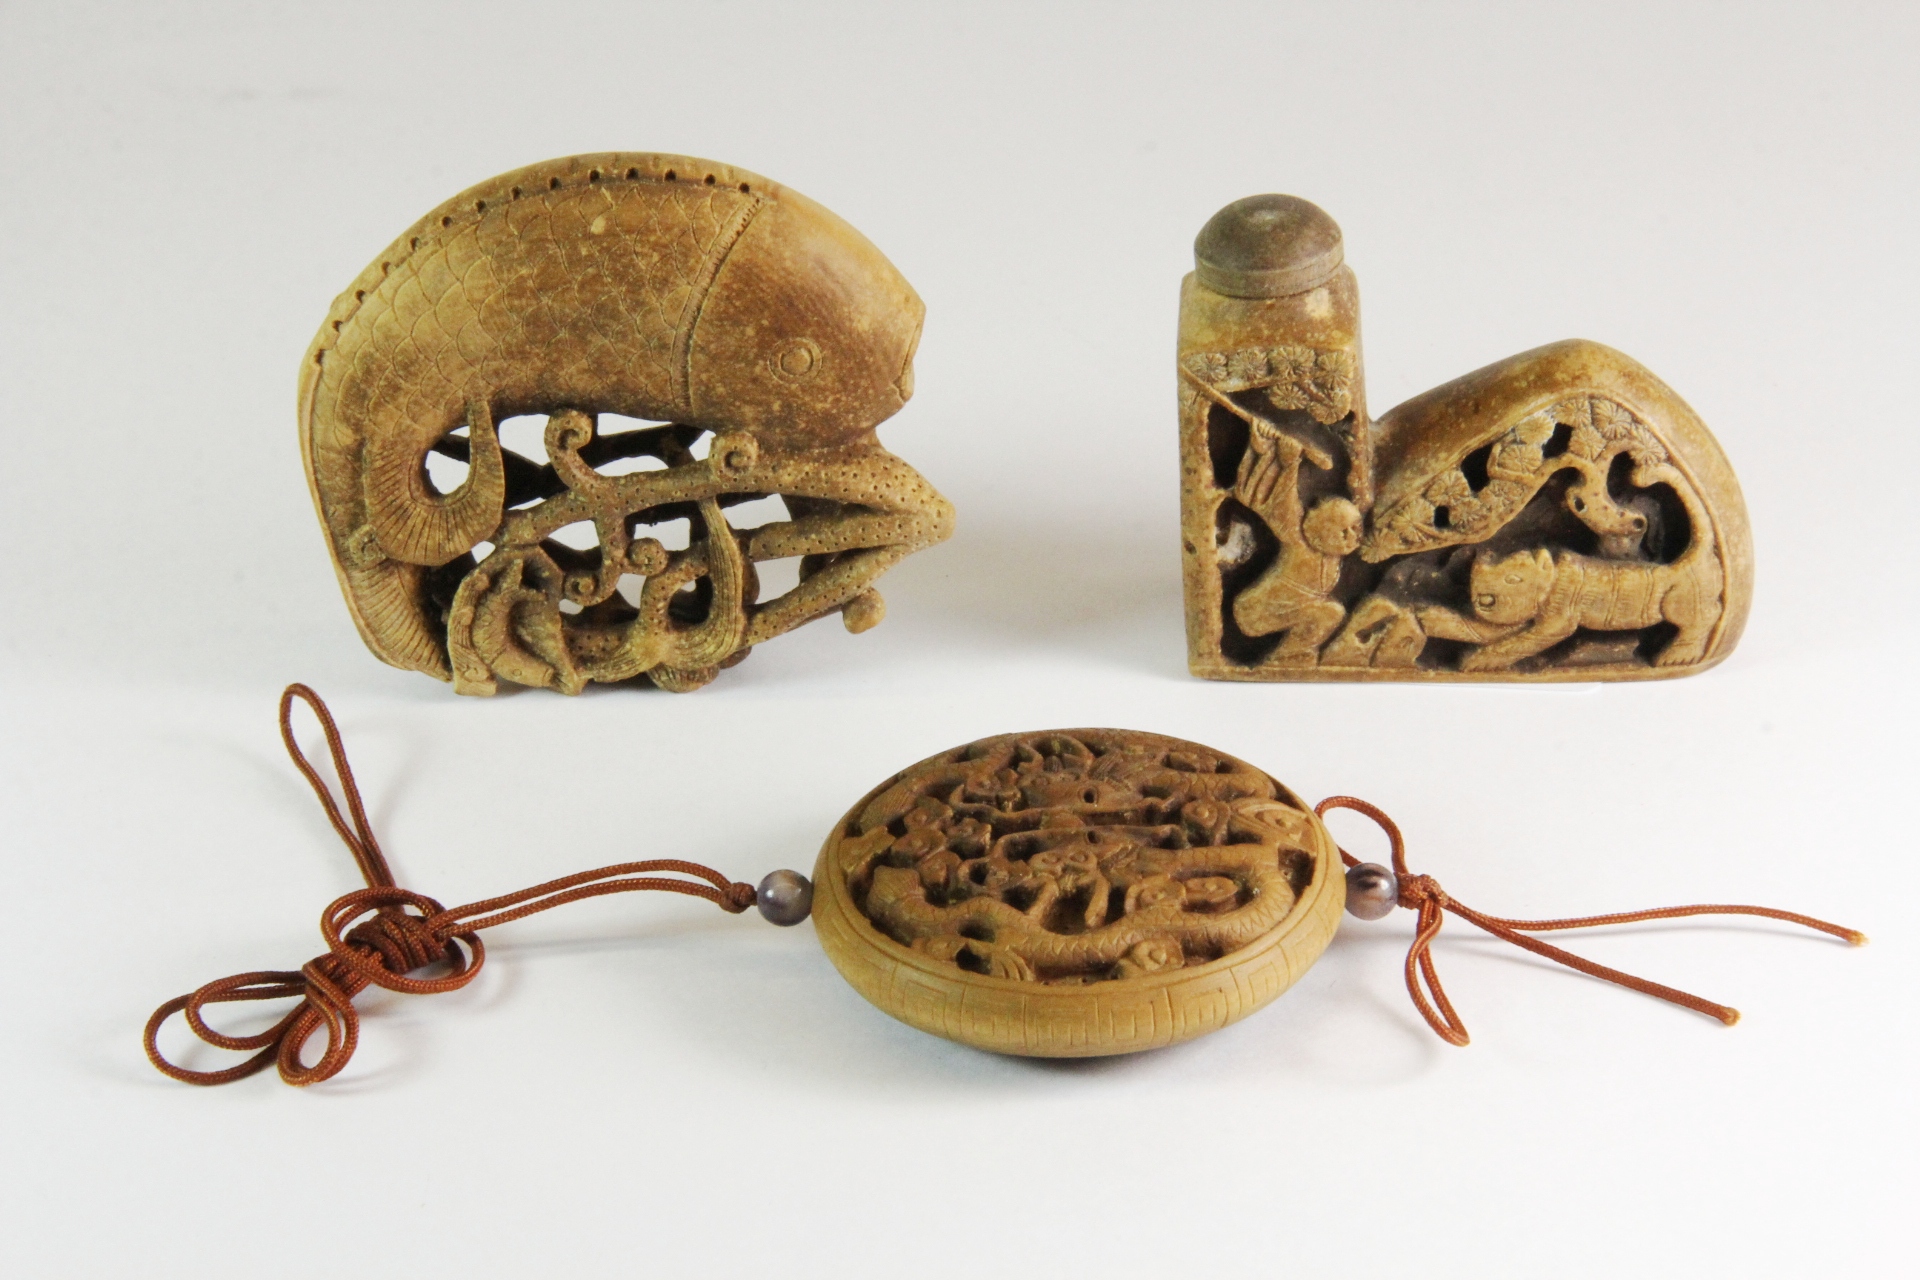 Two mid 20th century Chinese carved wooden snuff bottles and a carved wooden amulet. Prov. The